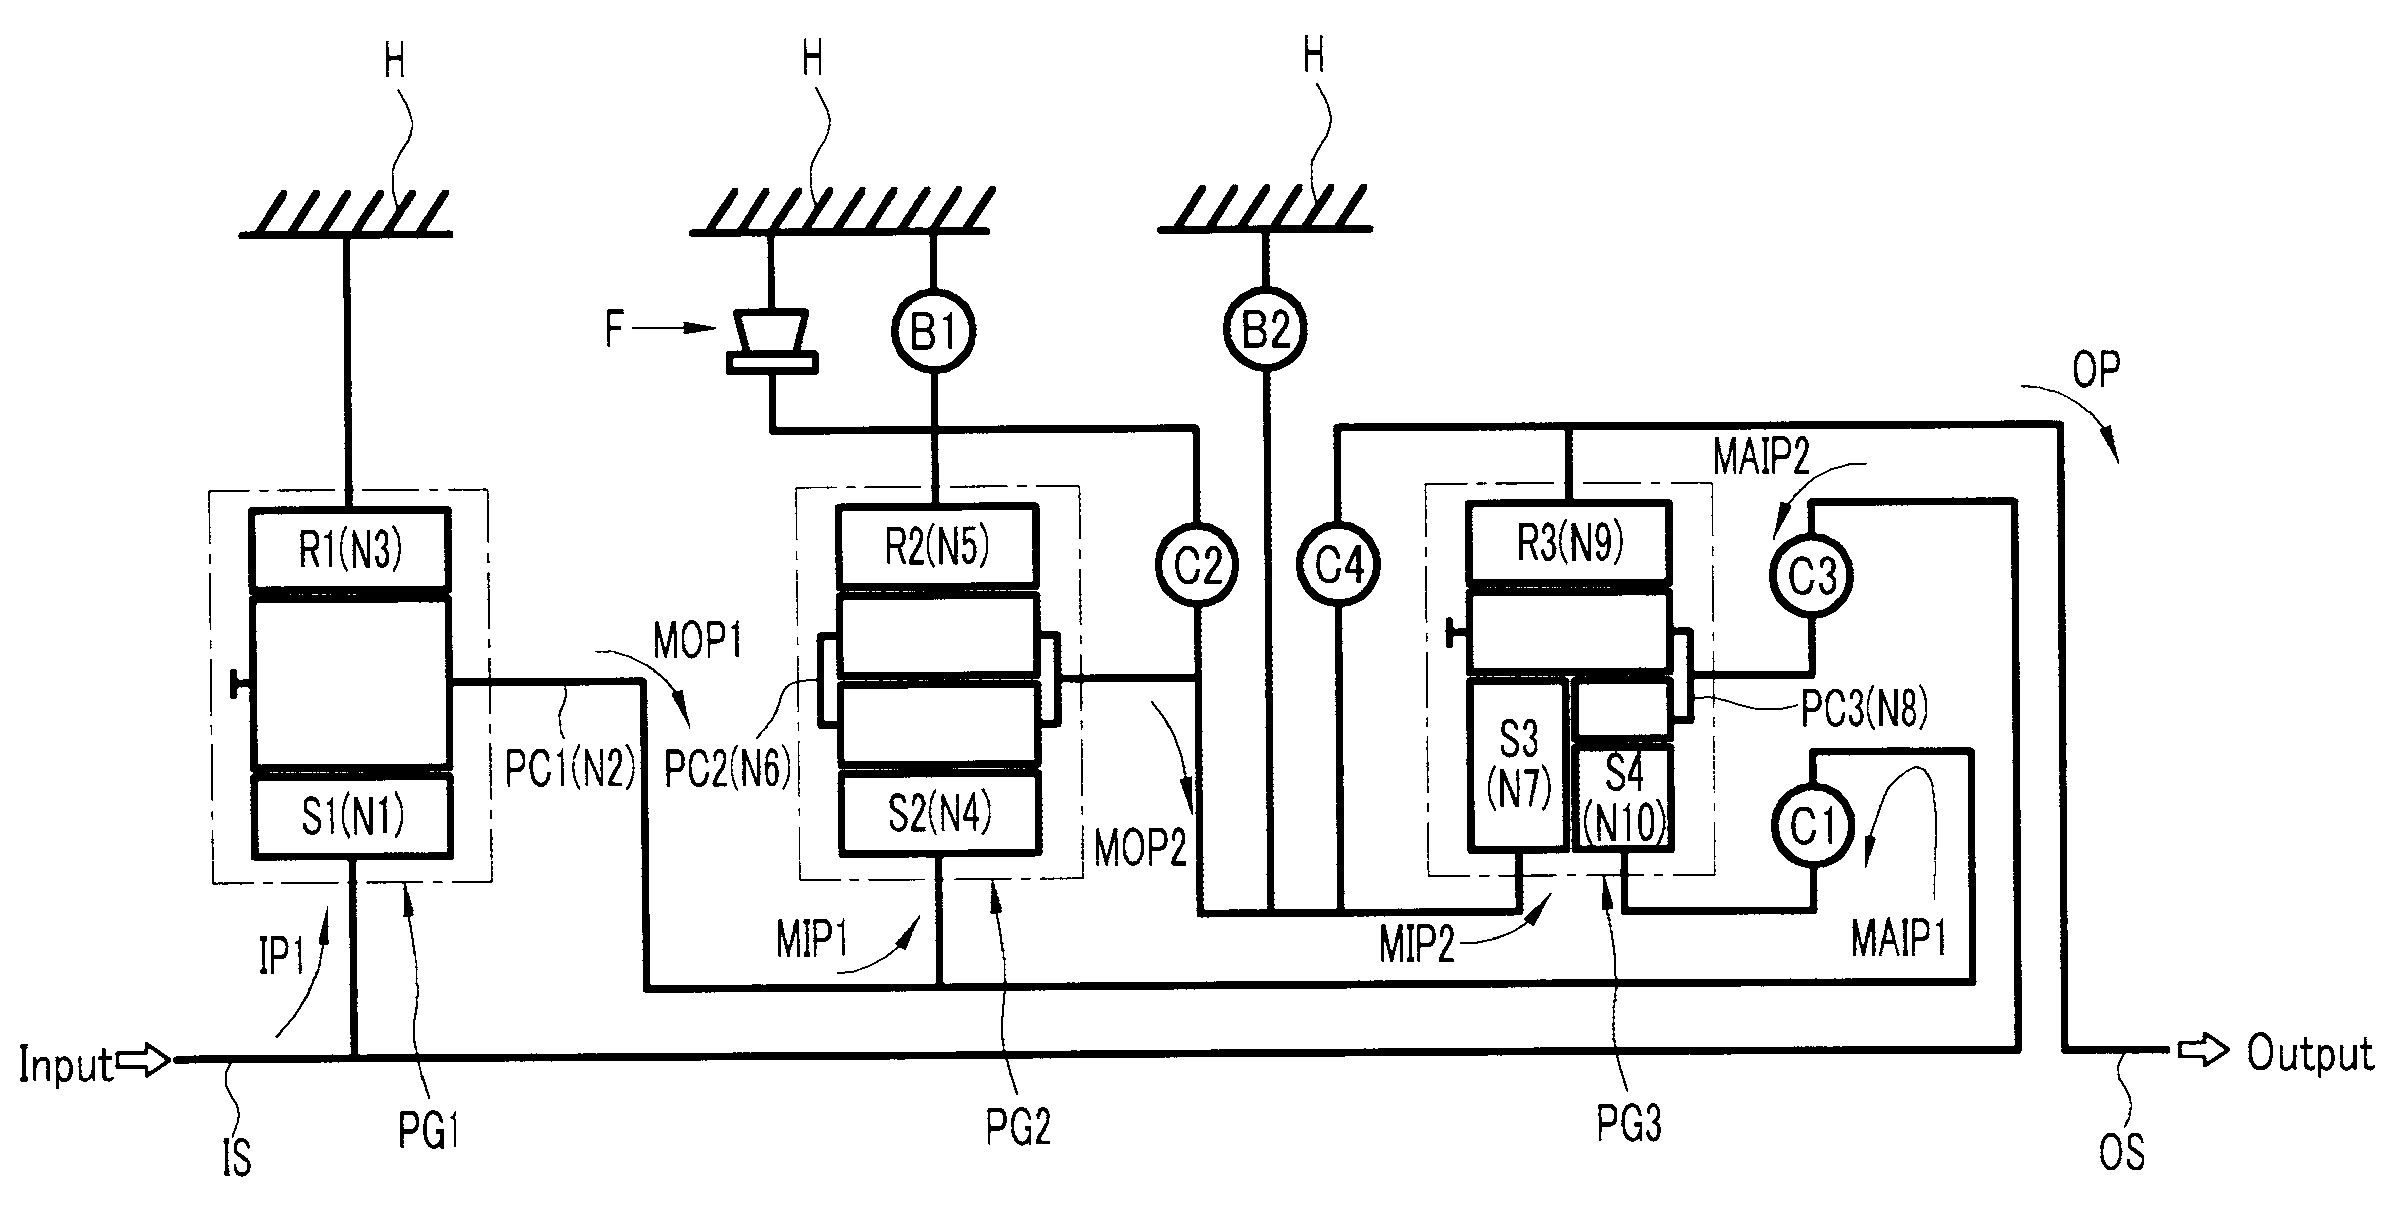 Gear train of an automatic transmission for a vehicle